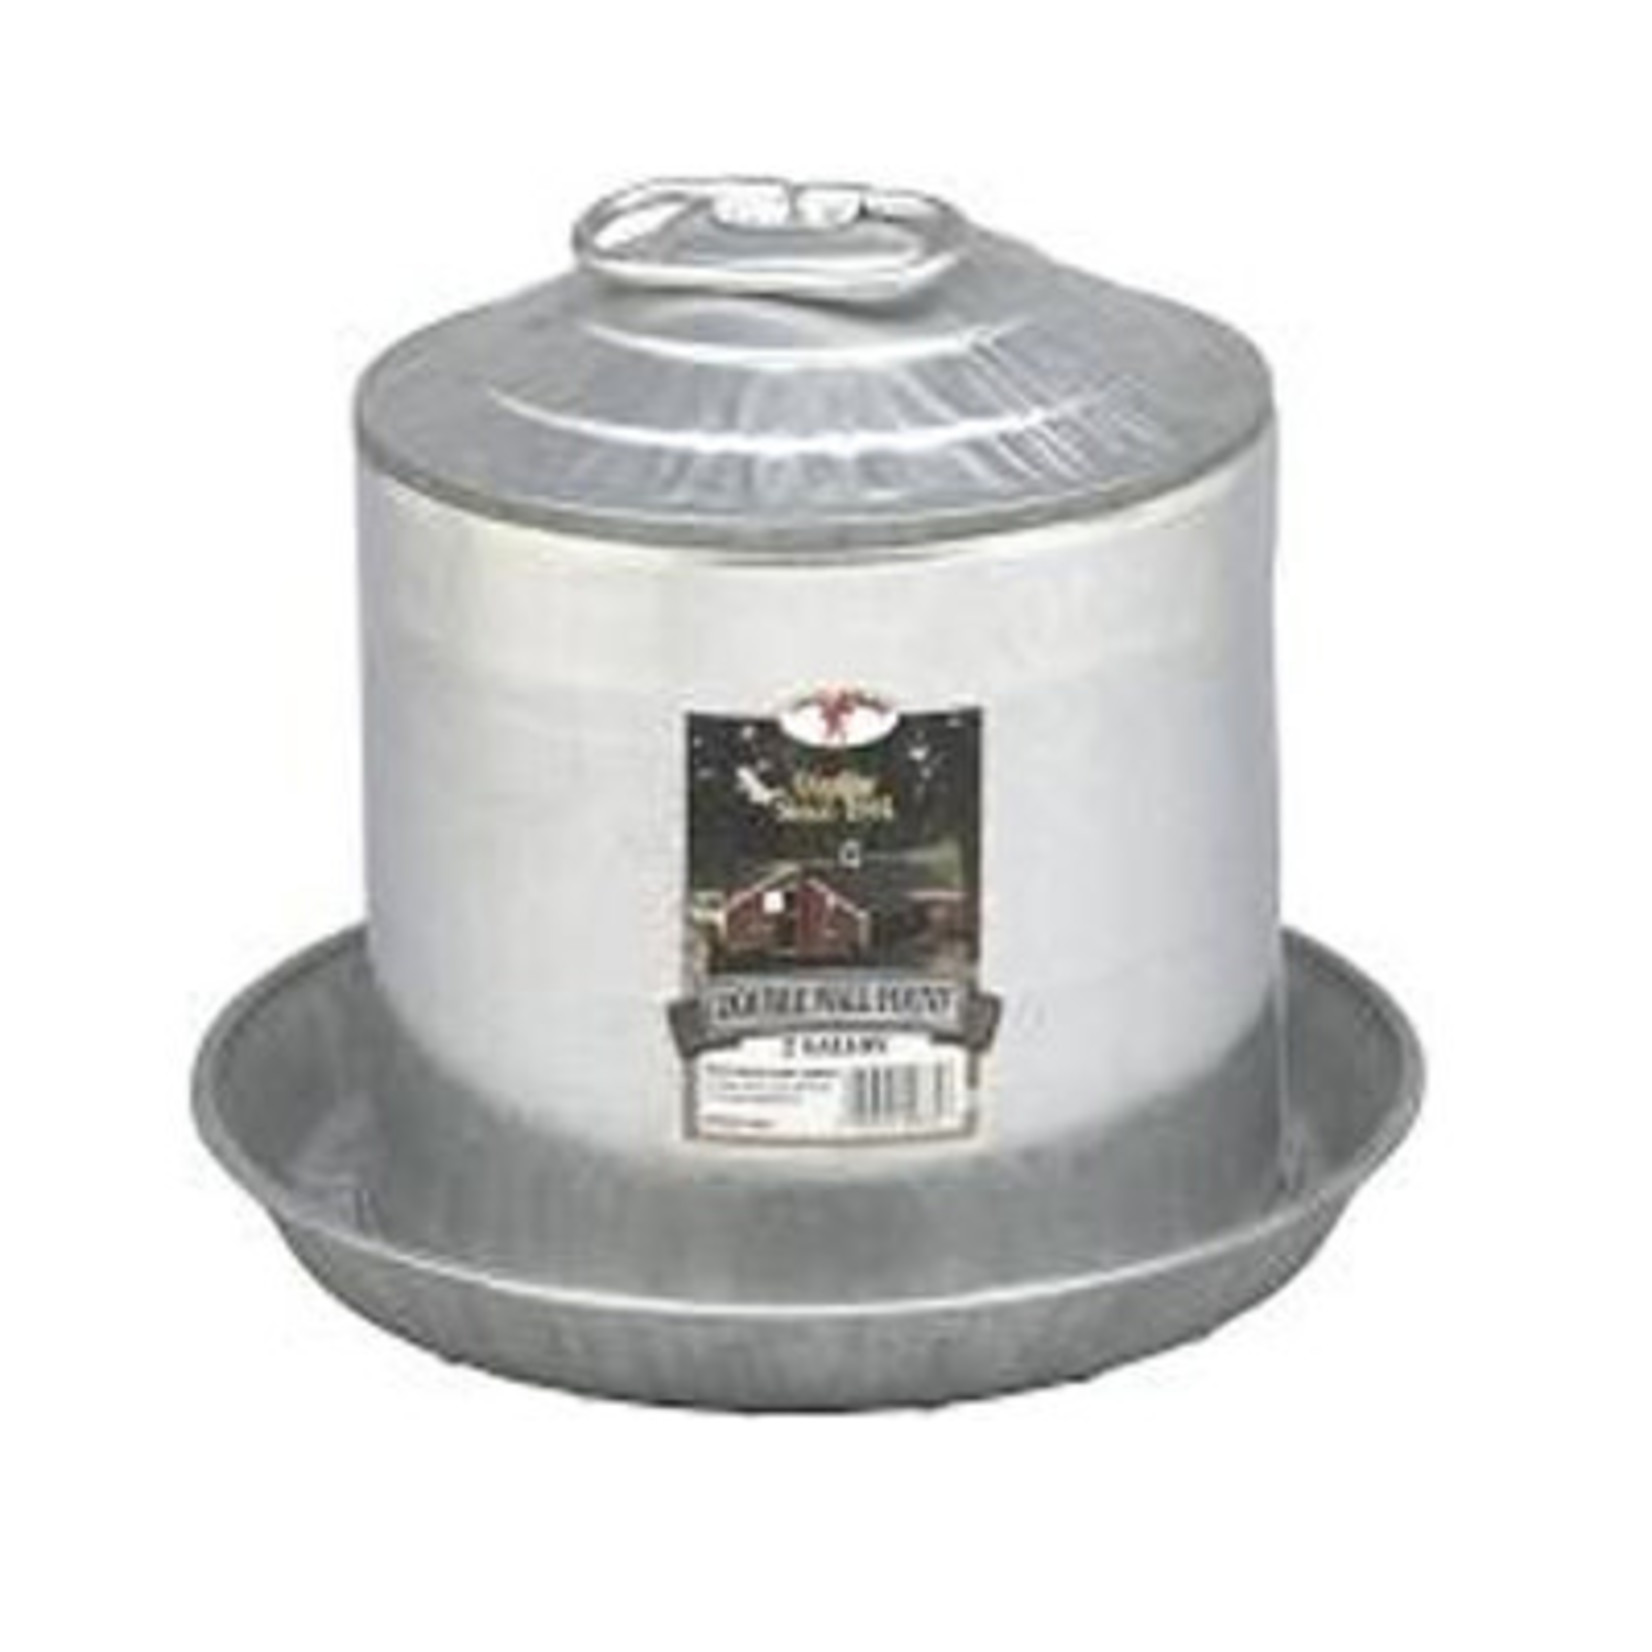 Little Giant Galvanized 2 Gallon Waterer #9832 Poultry